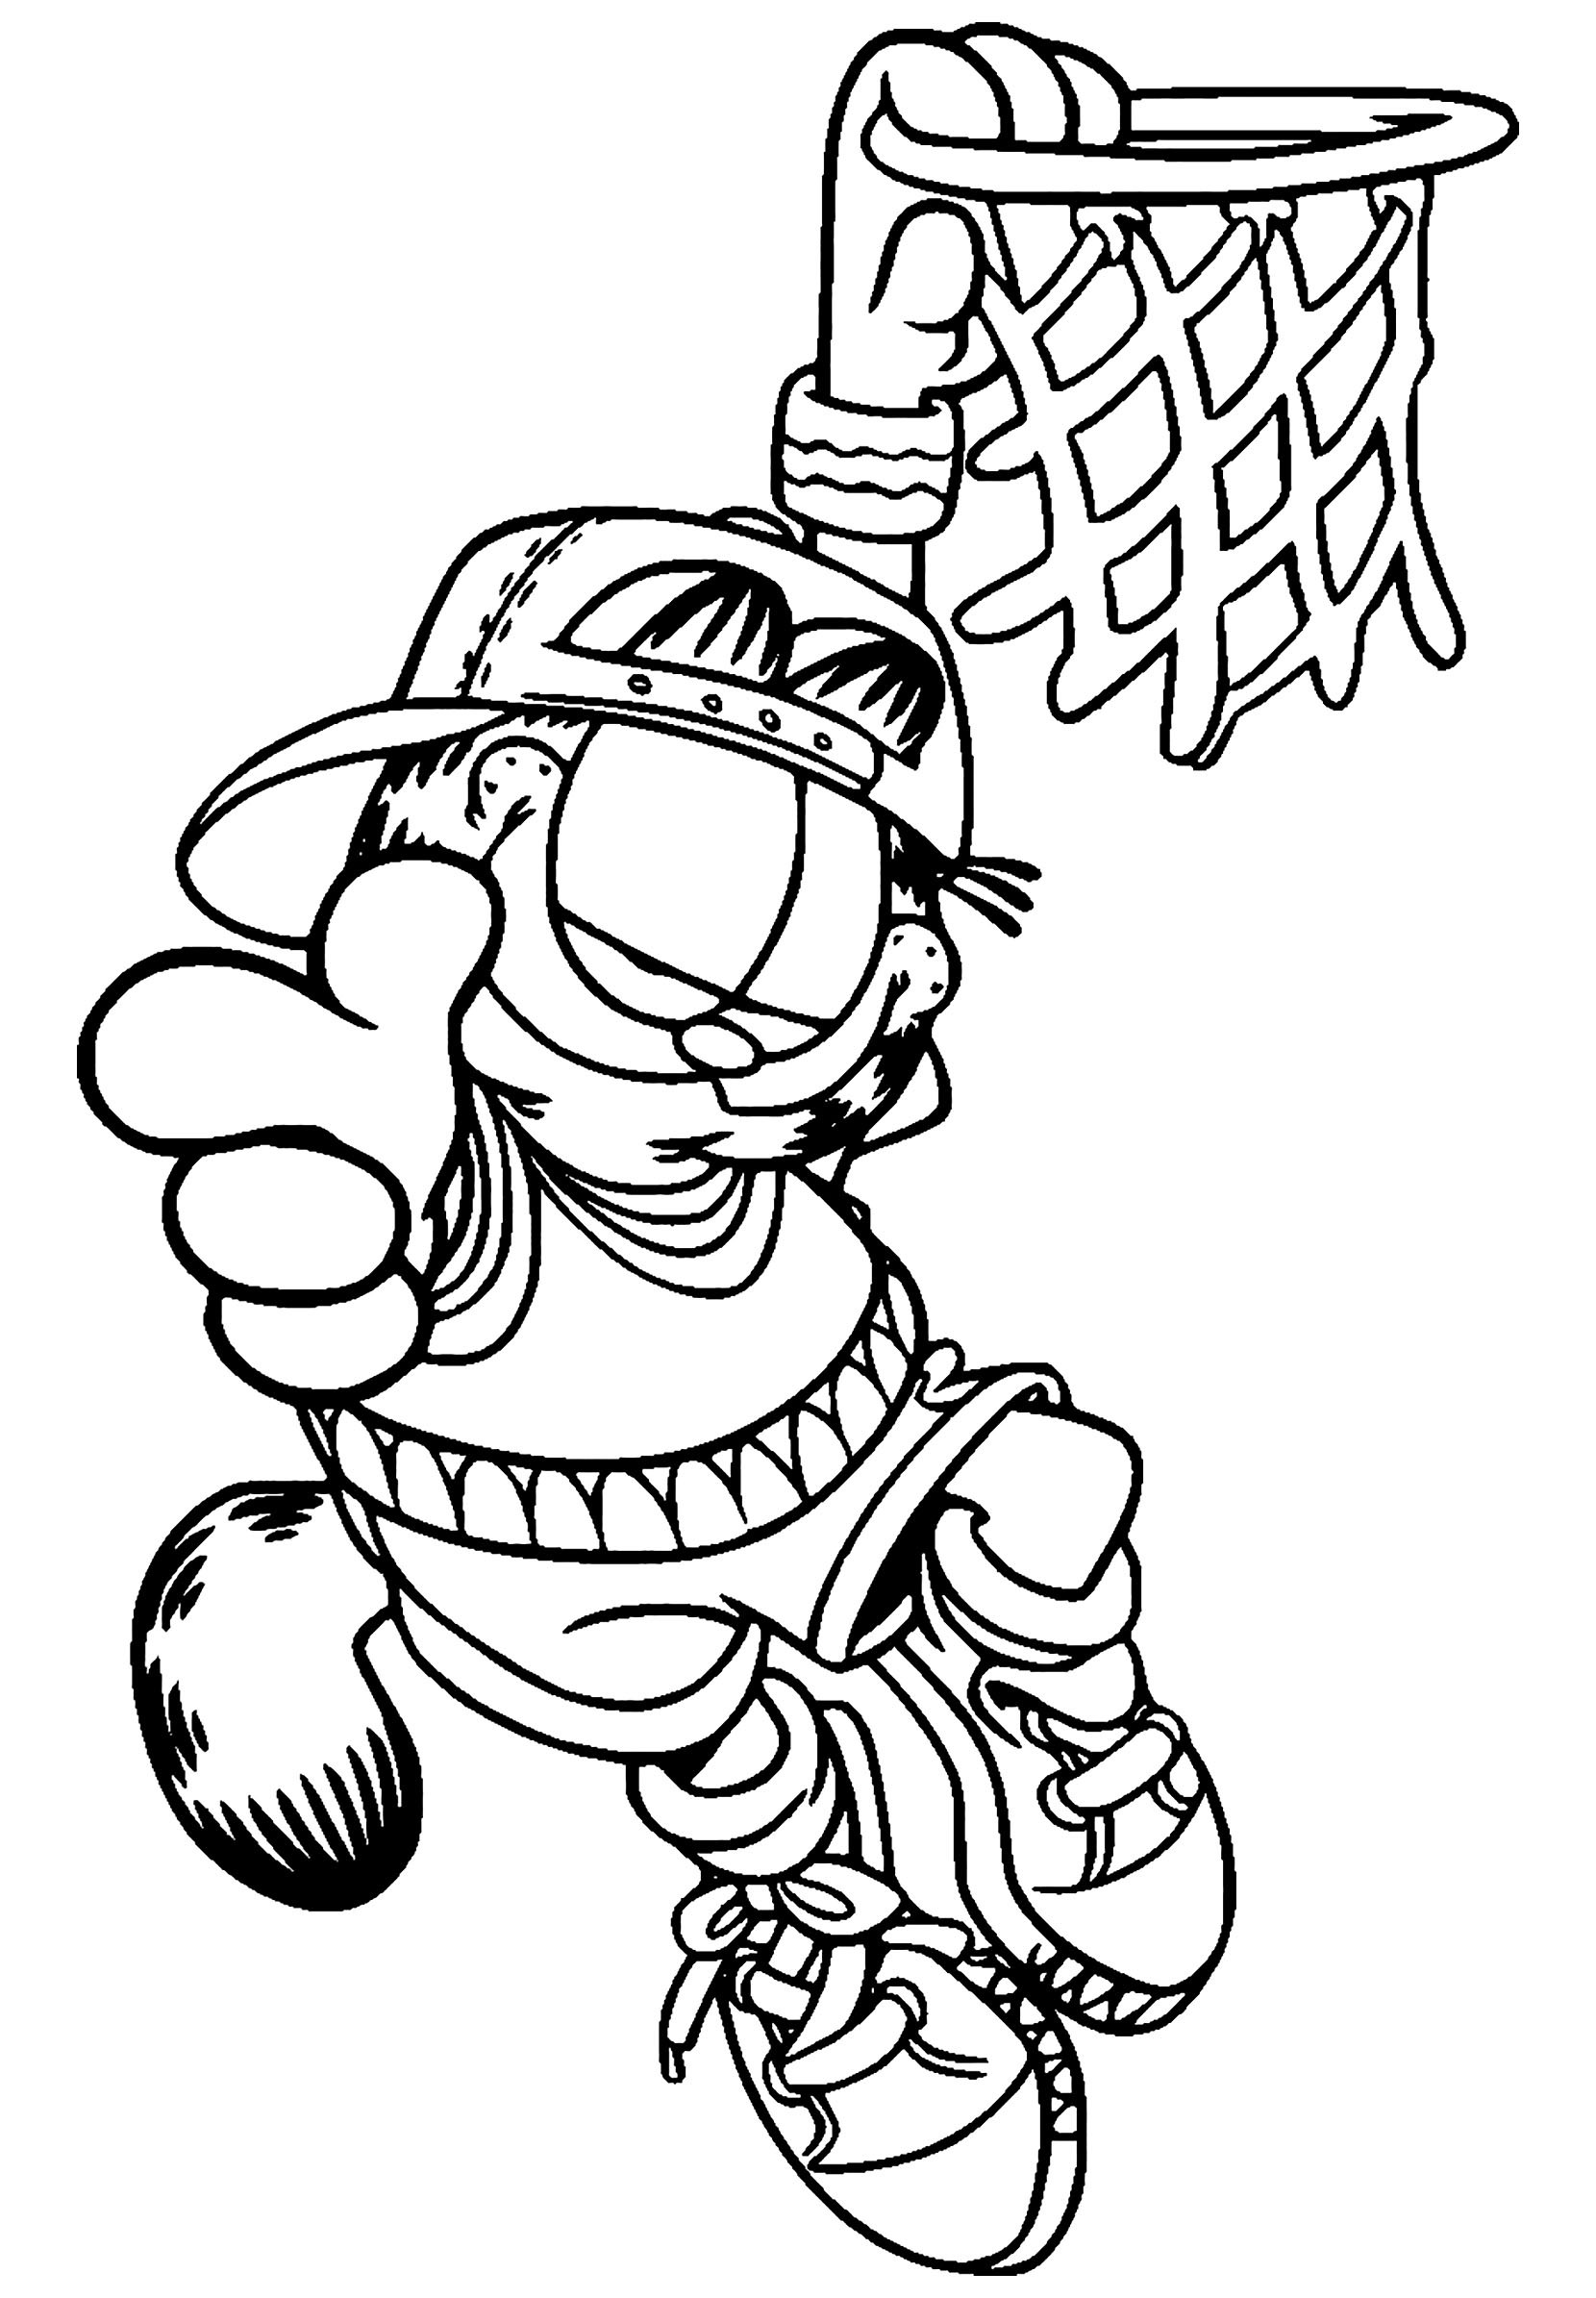 Kids Coloring Book
 Garfield to Garfield Kids Coloring Pages